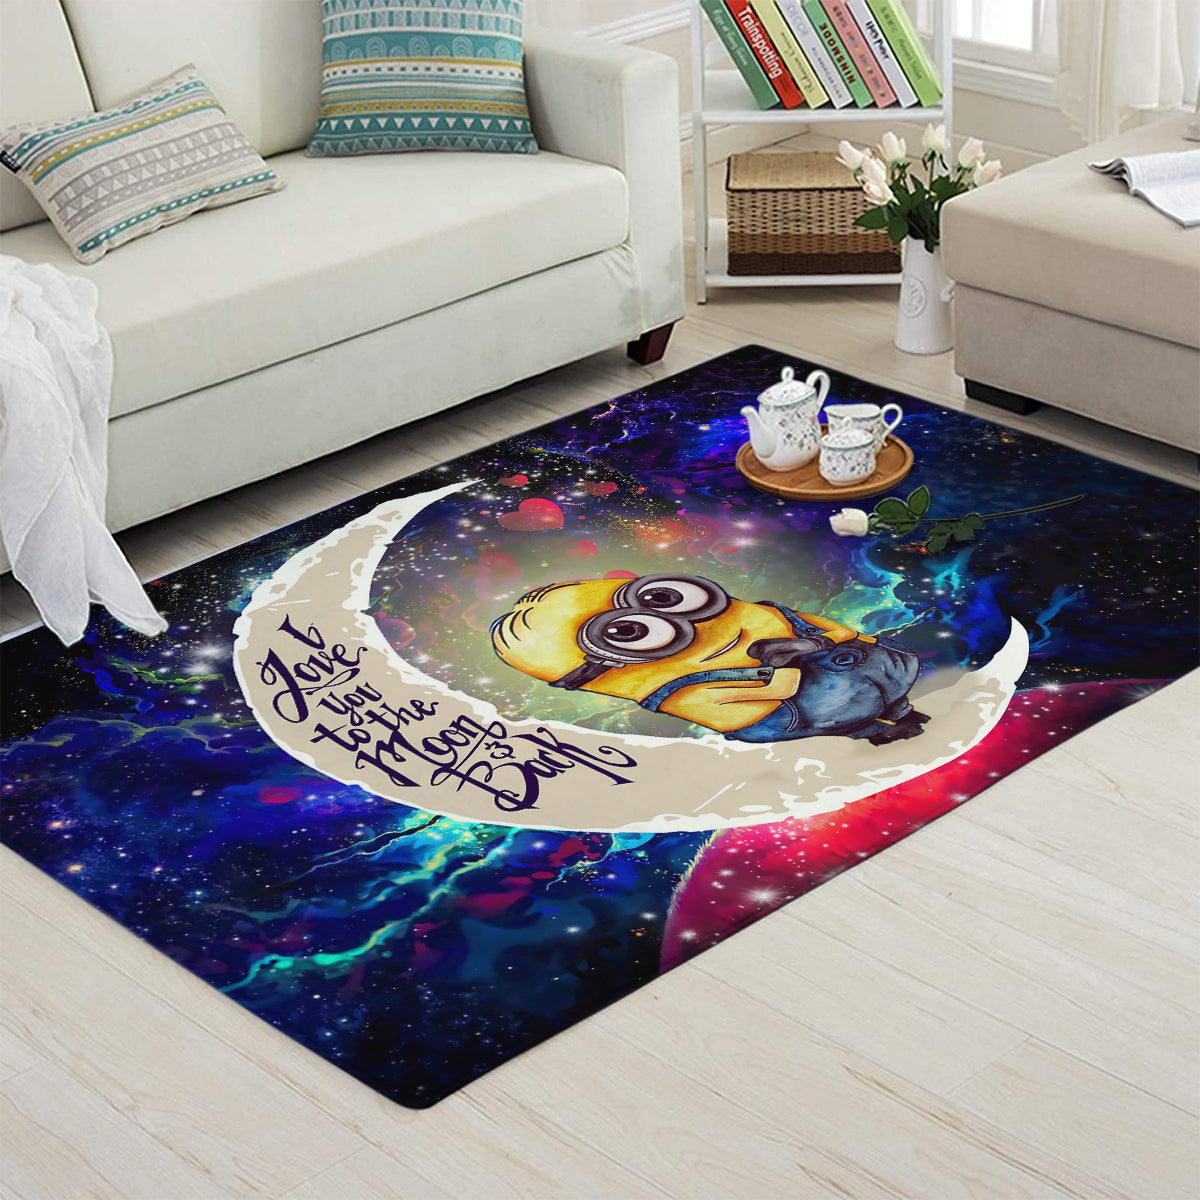 Cute Minions Despicable Me Love You To The Moon Galaxy Carpet Rug Home Room Decor